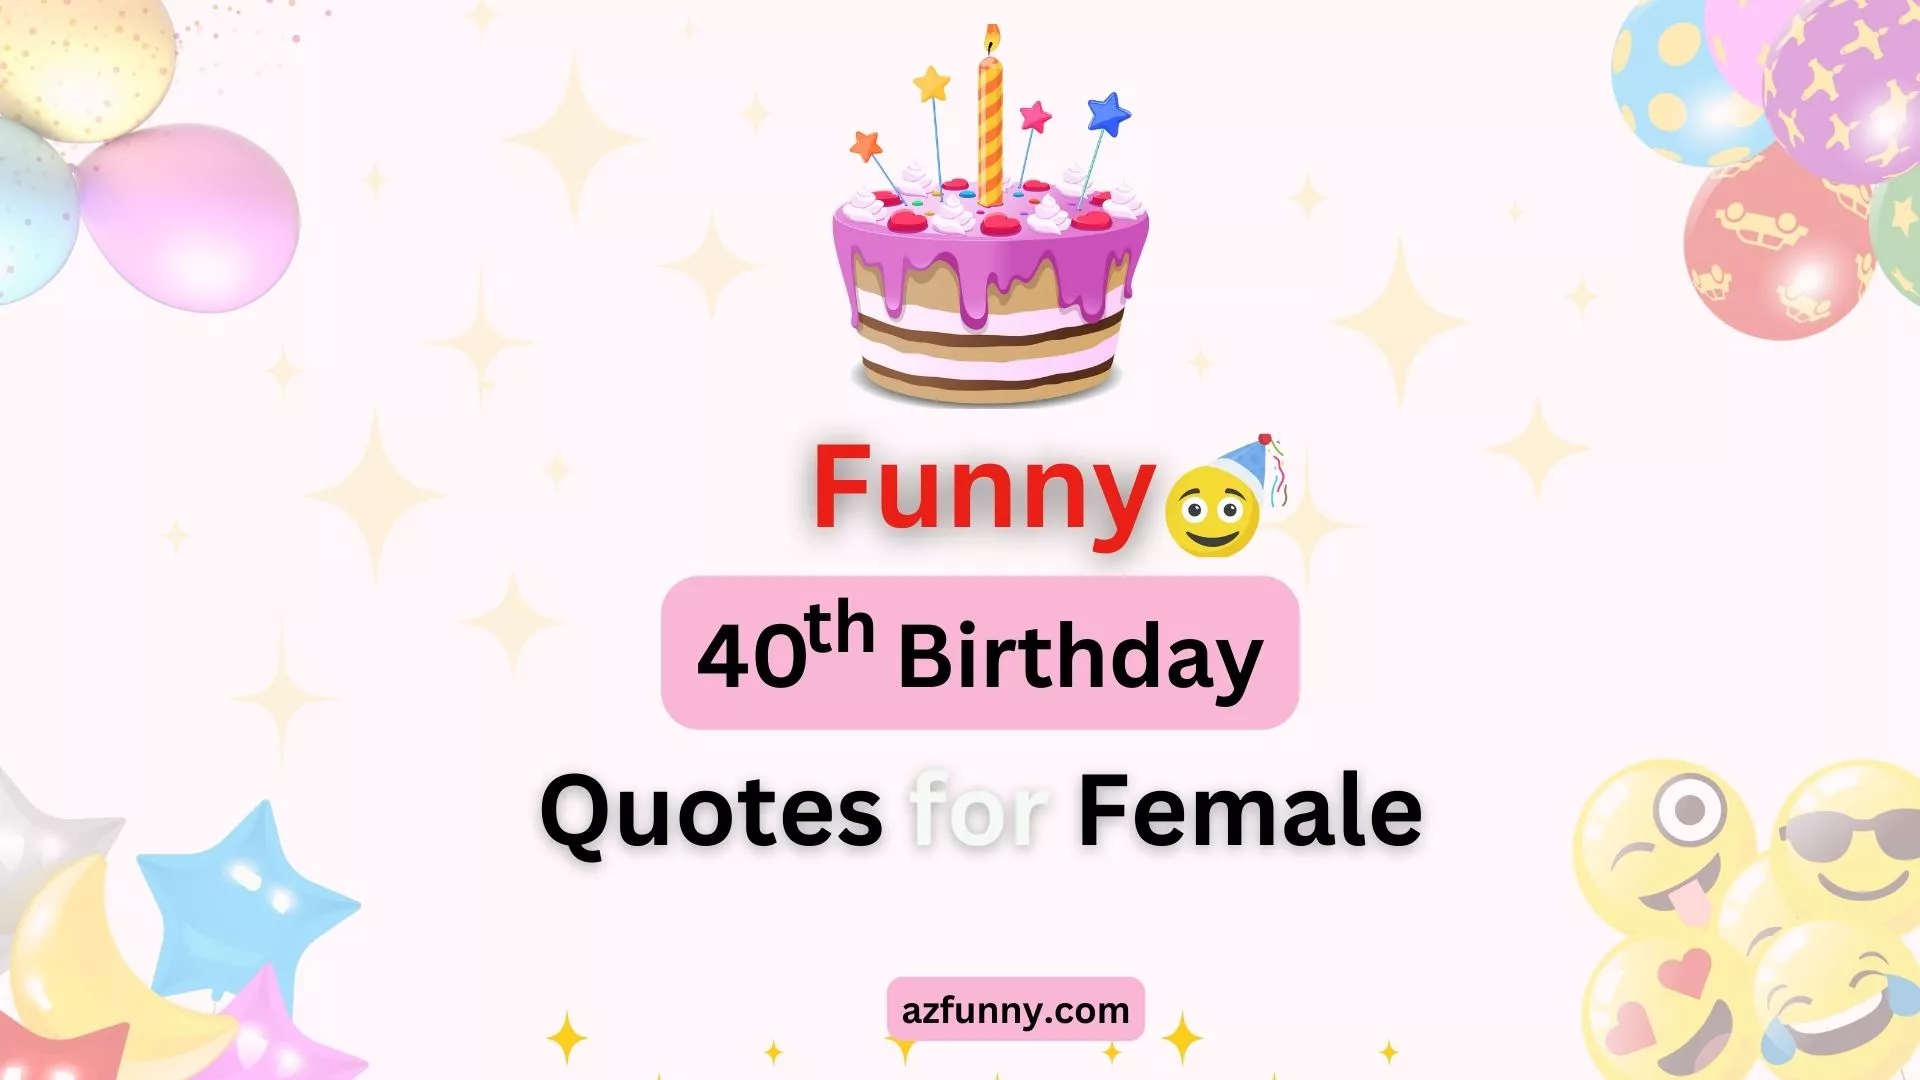 30+ Funny 40th Birthday Quotes for Female To Make Her Lol